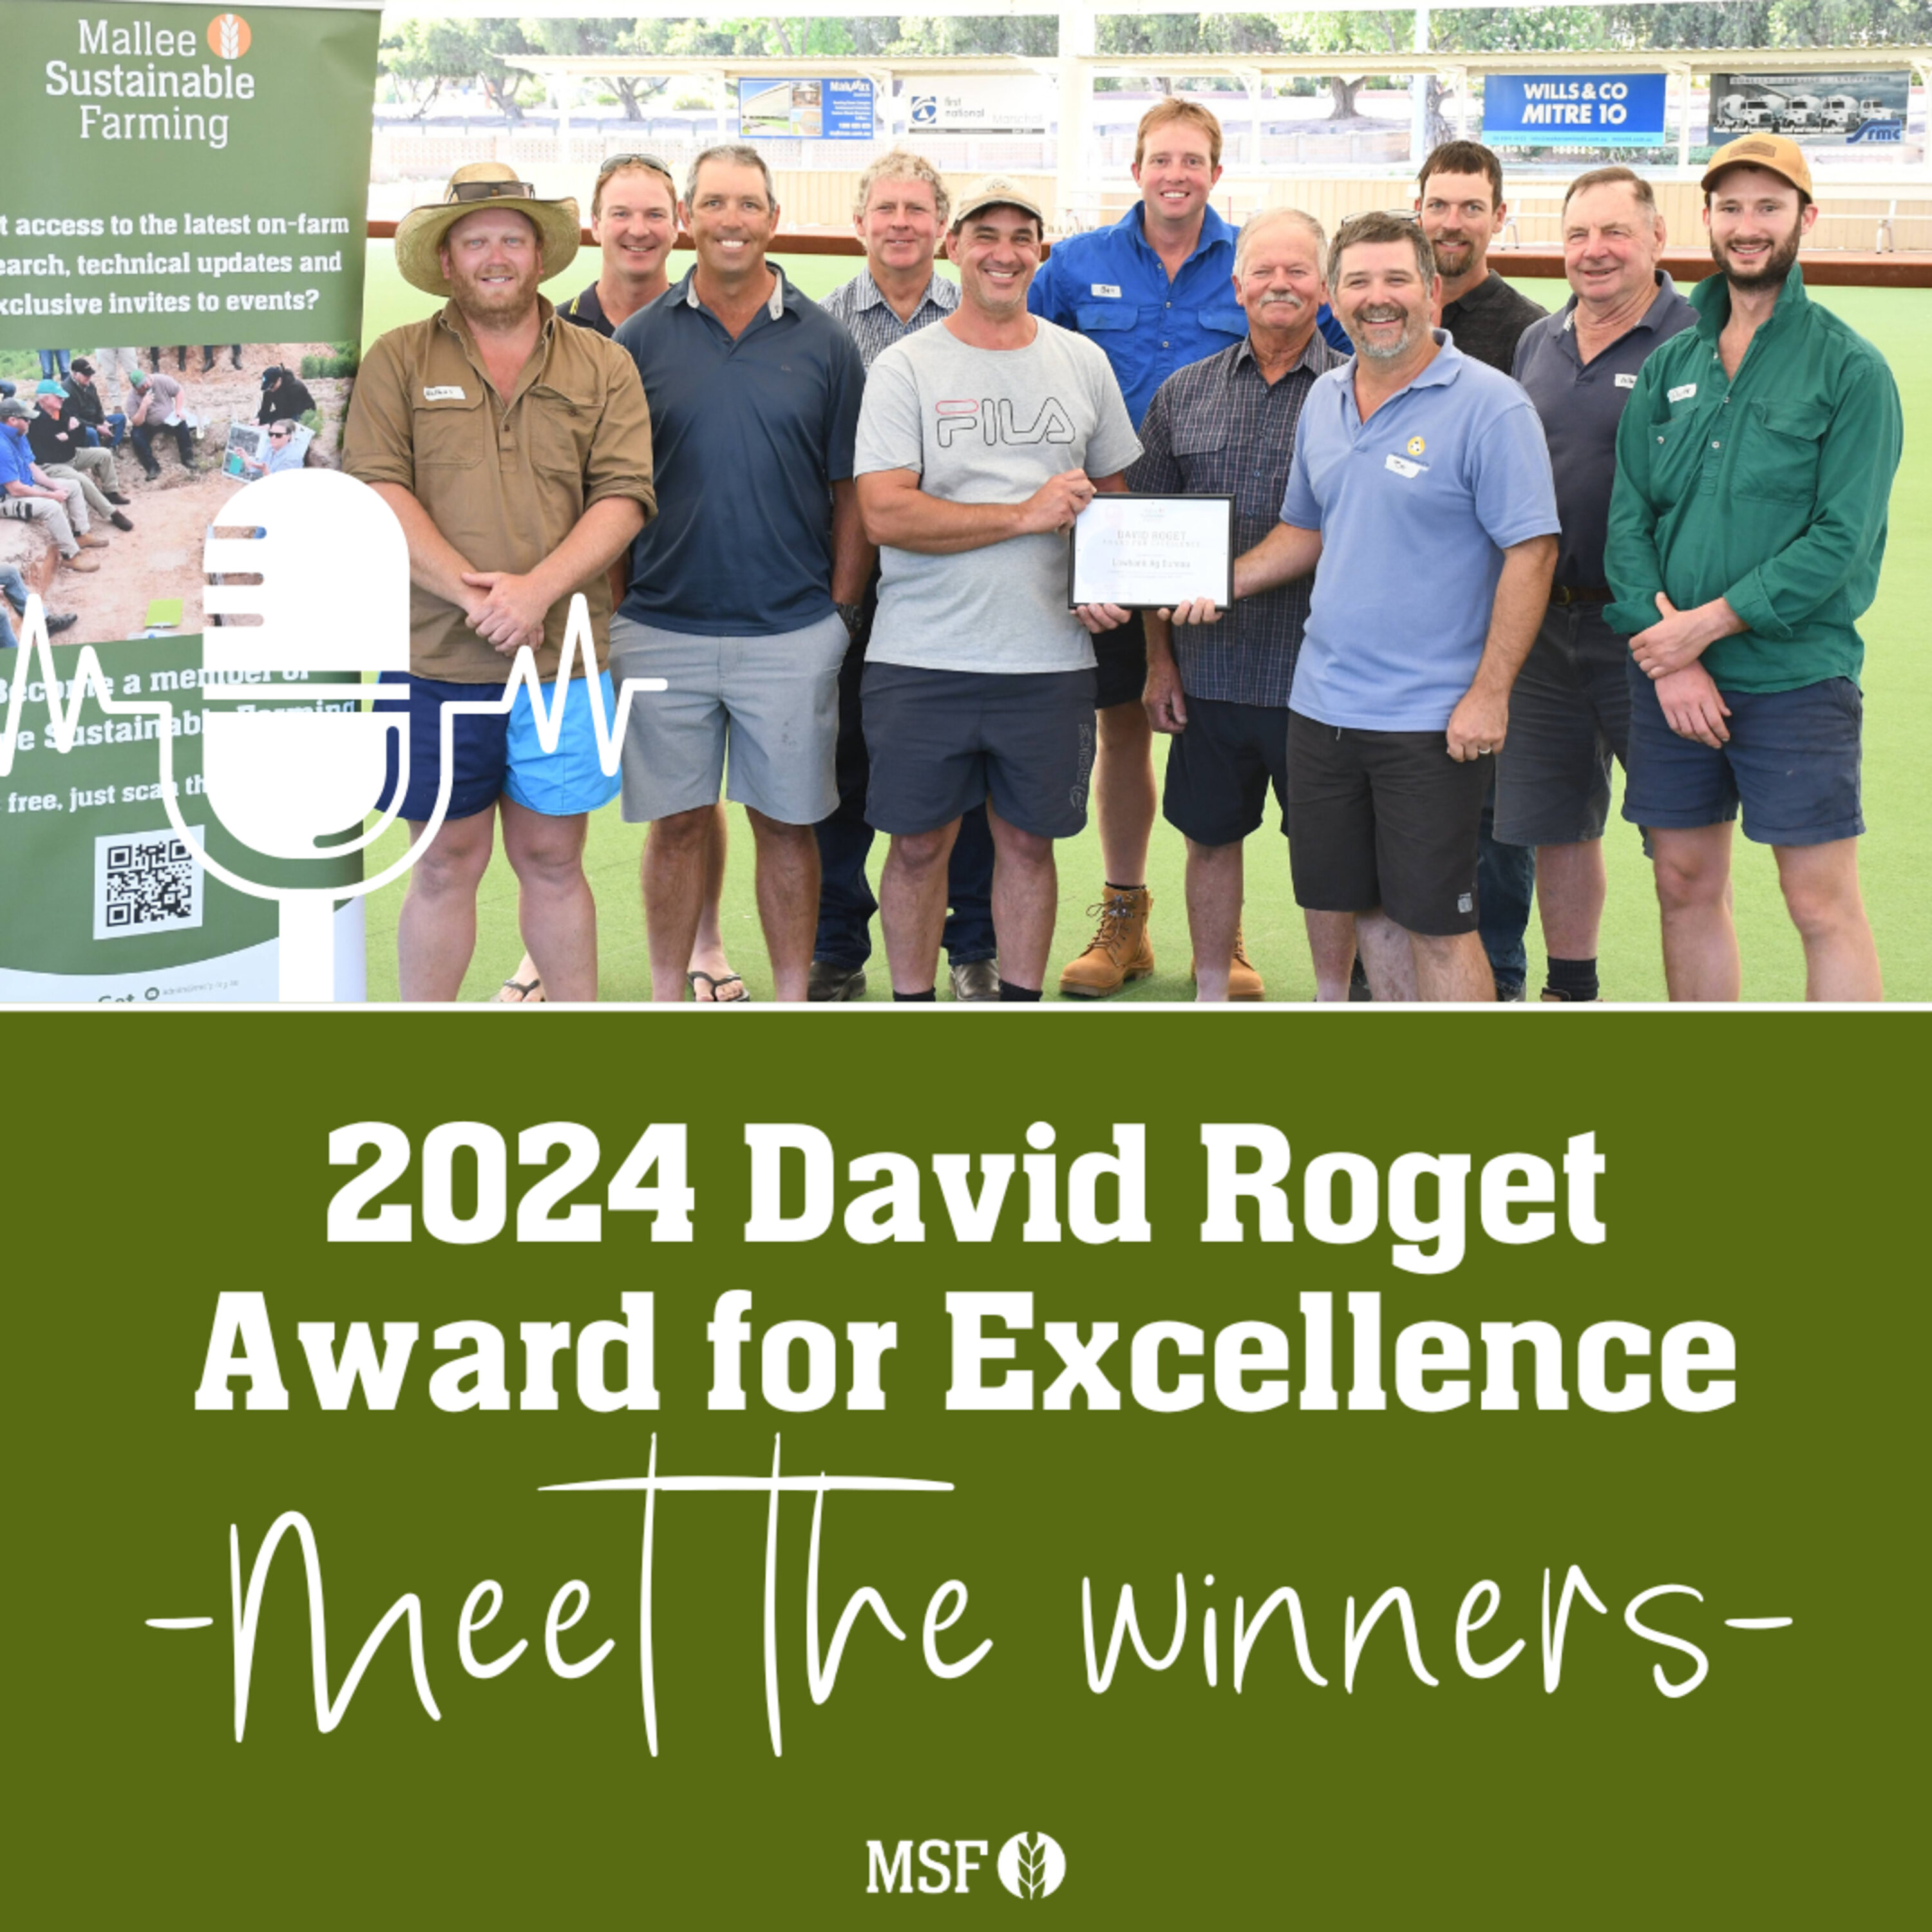 Announcing the winner of the 2024 David Roget Award for Excellence